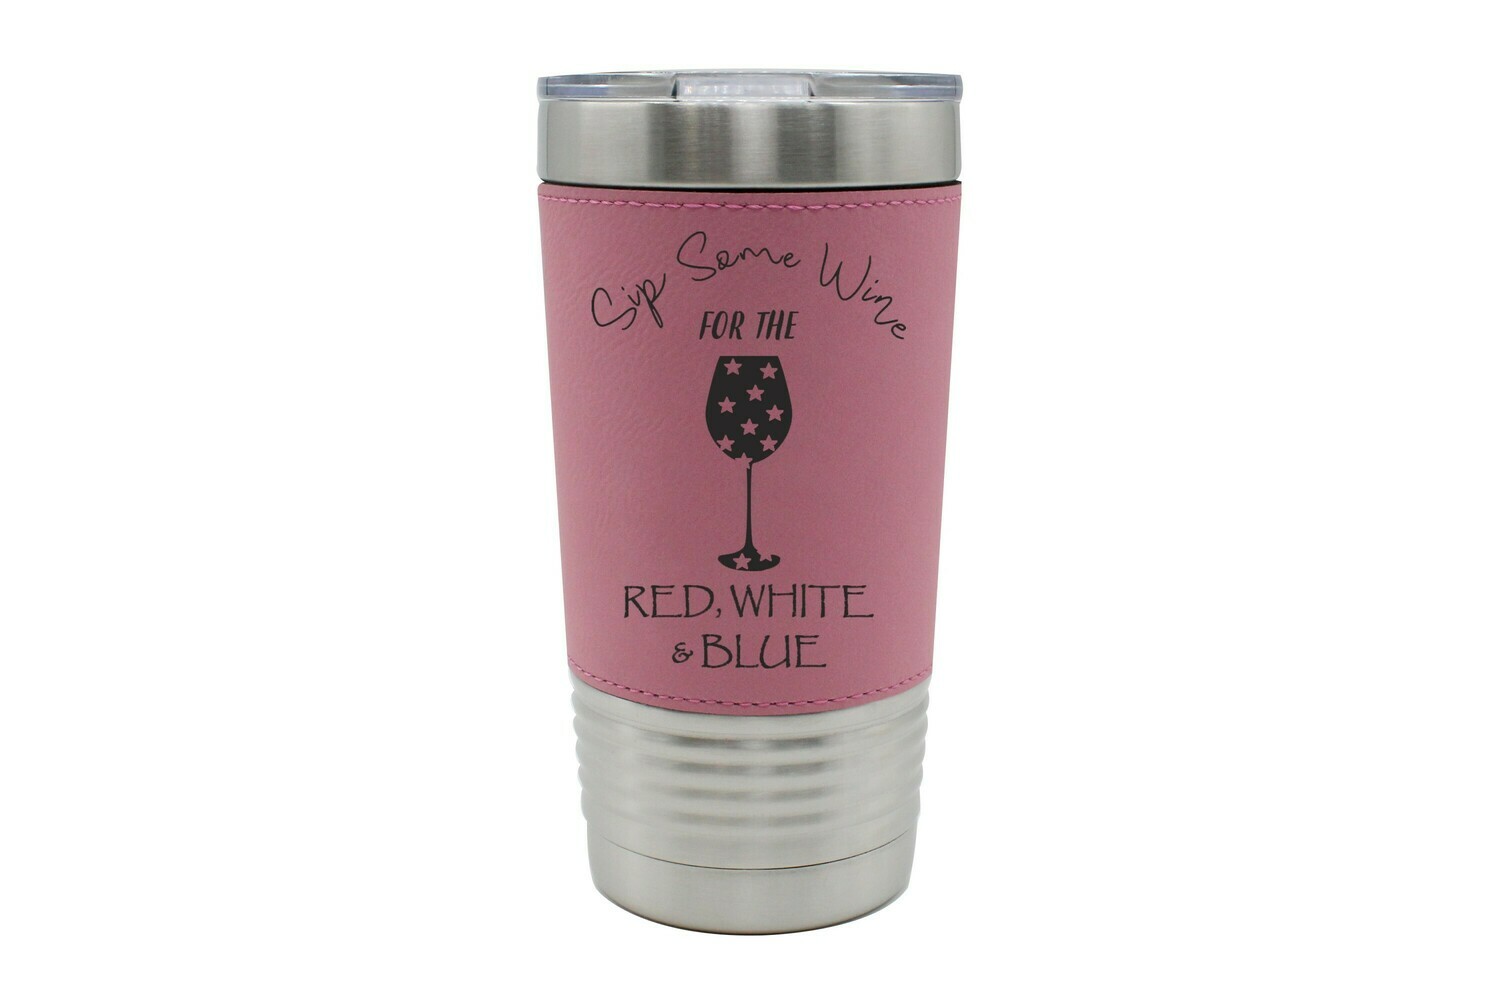 Leatherette 20 oz Sip Some Wine for the Red, White & Blue Insulated Tumbler